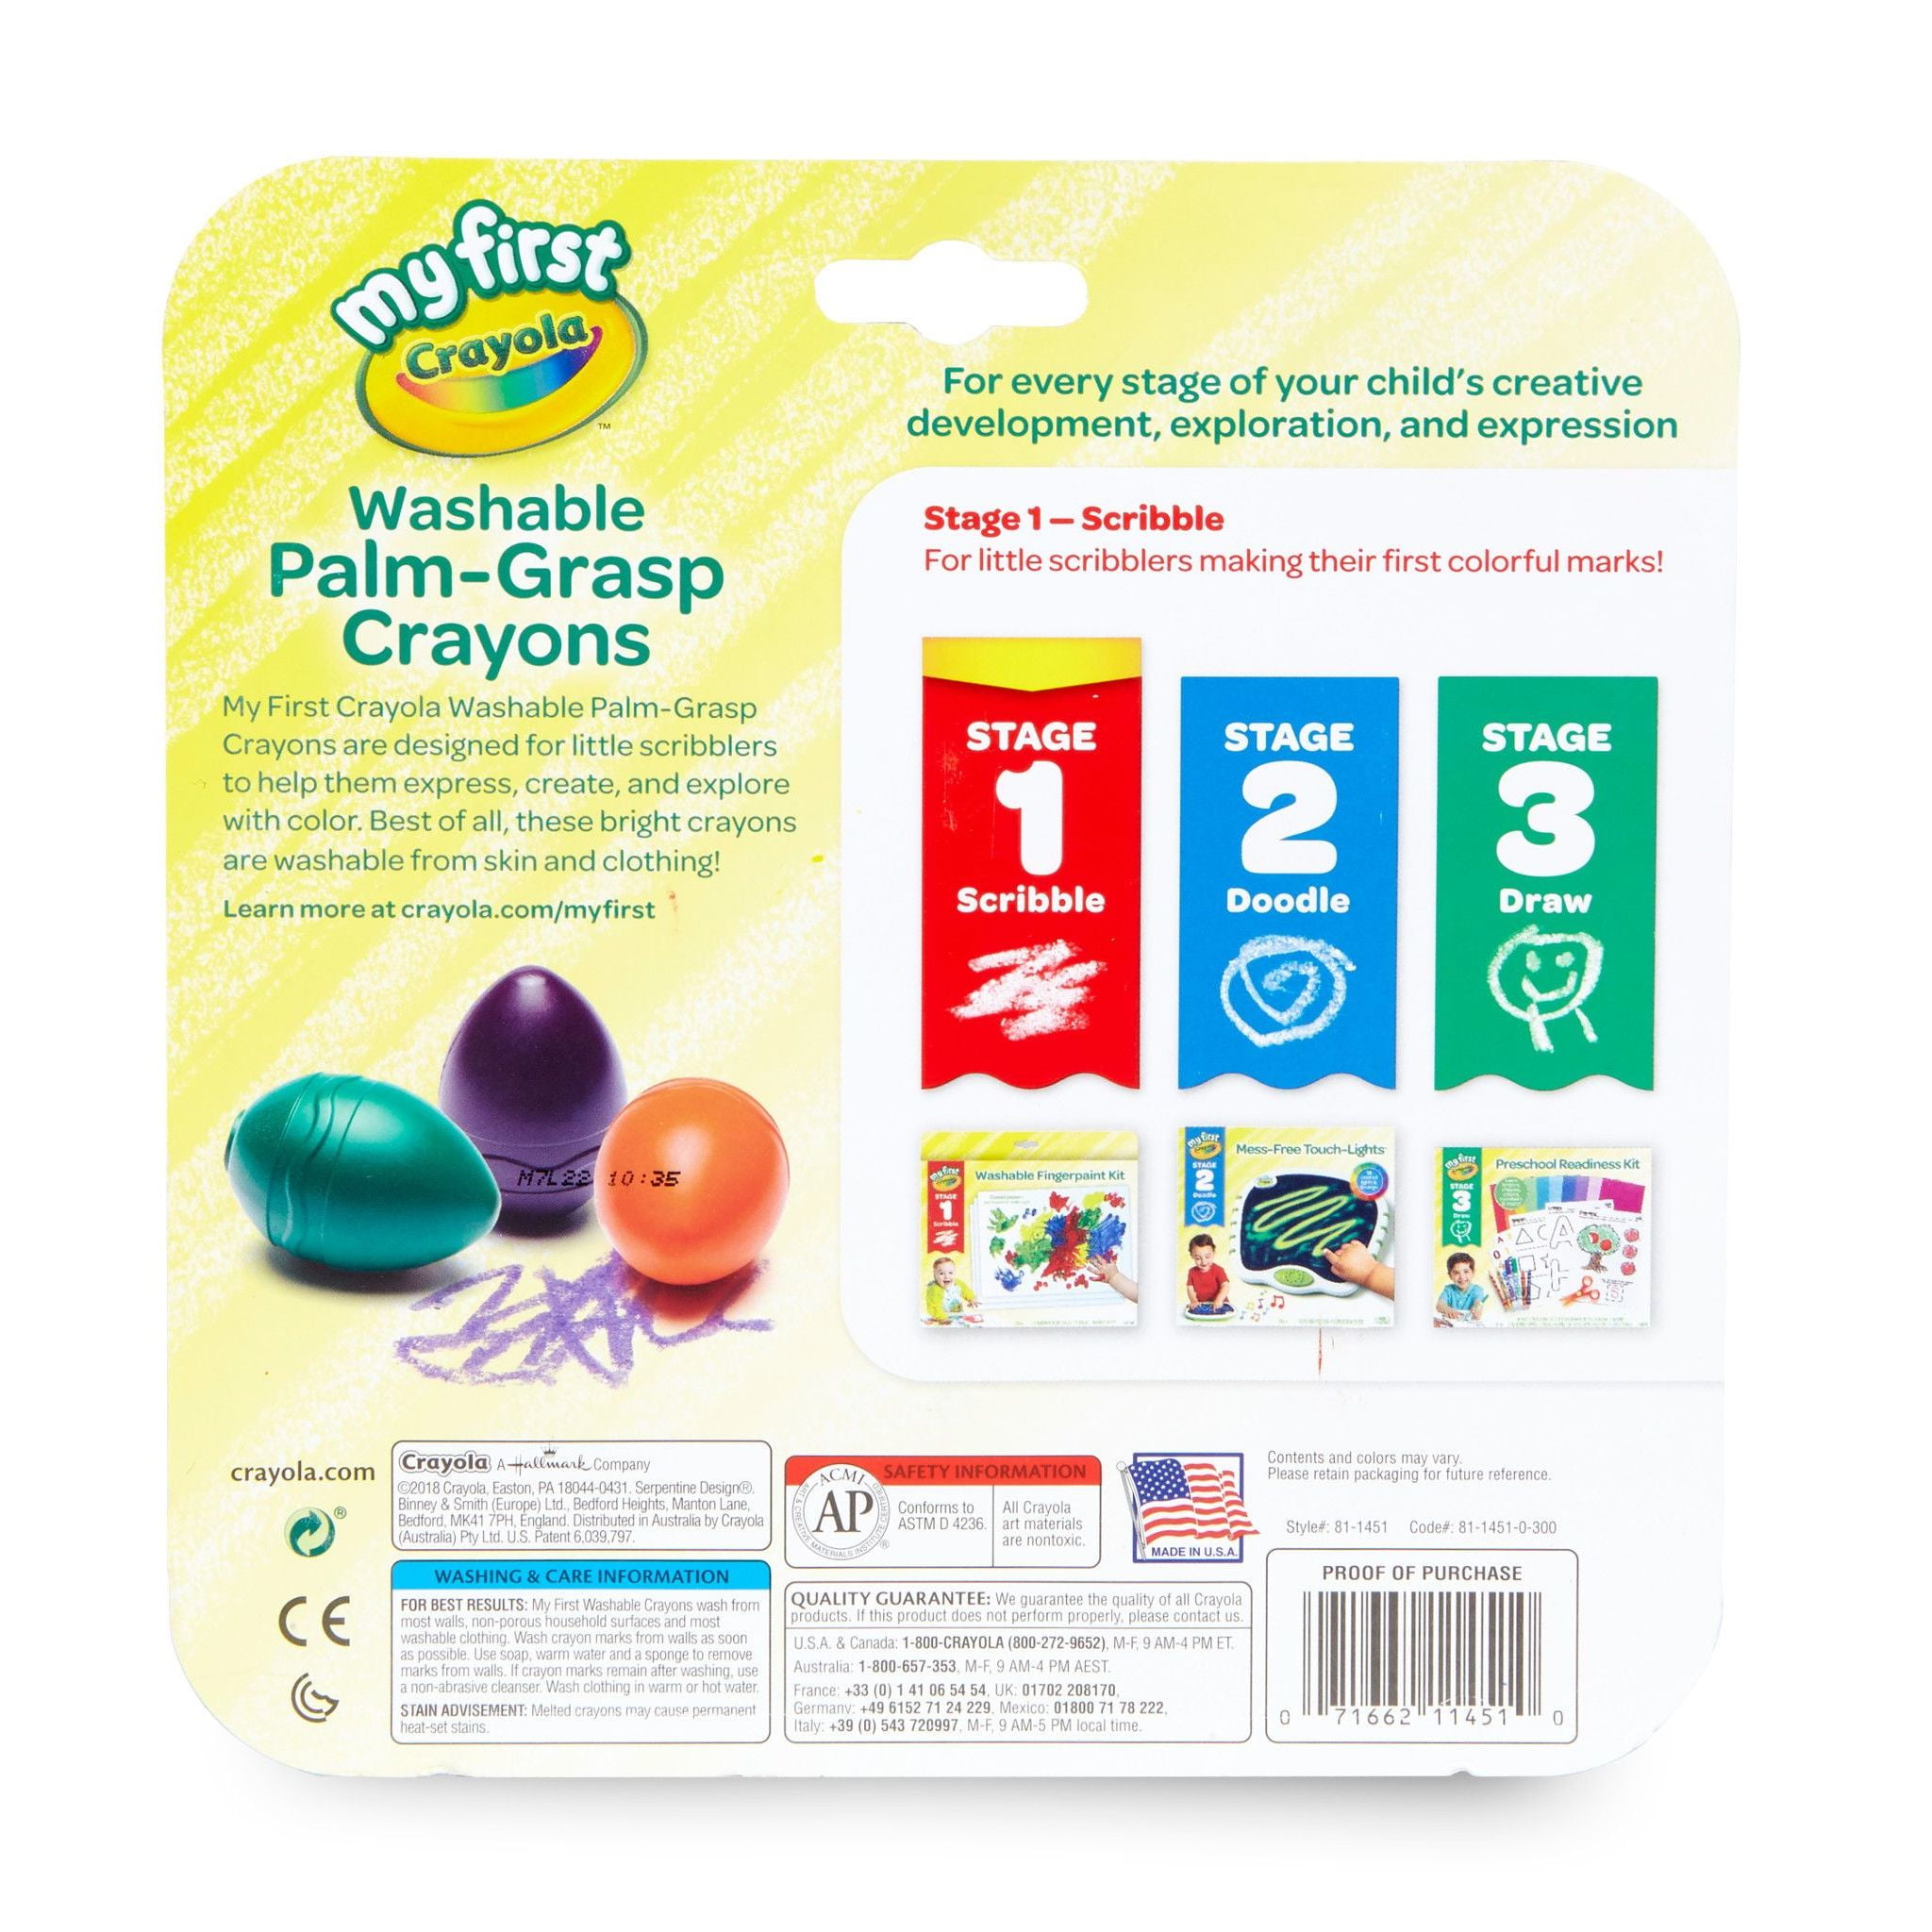 Dsseng 6 Colors Toddler Crayons Egg Crayons Palm Grasp Crayons Washable  Crayons Paint Crayons for Kids Ages 1-3 